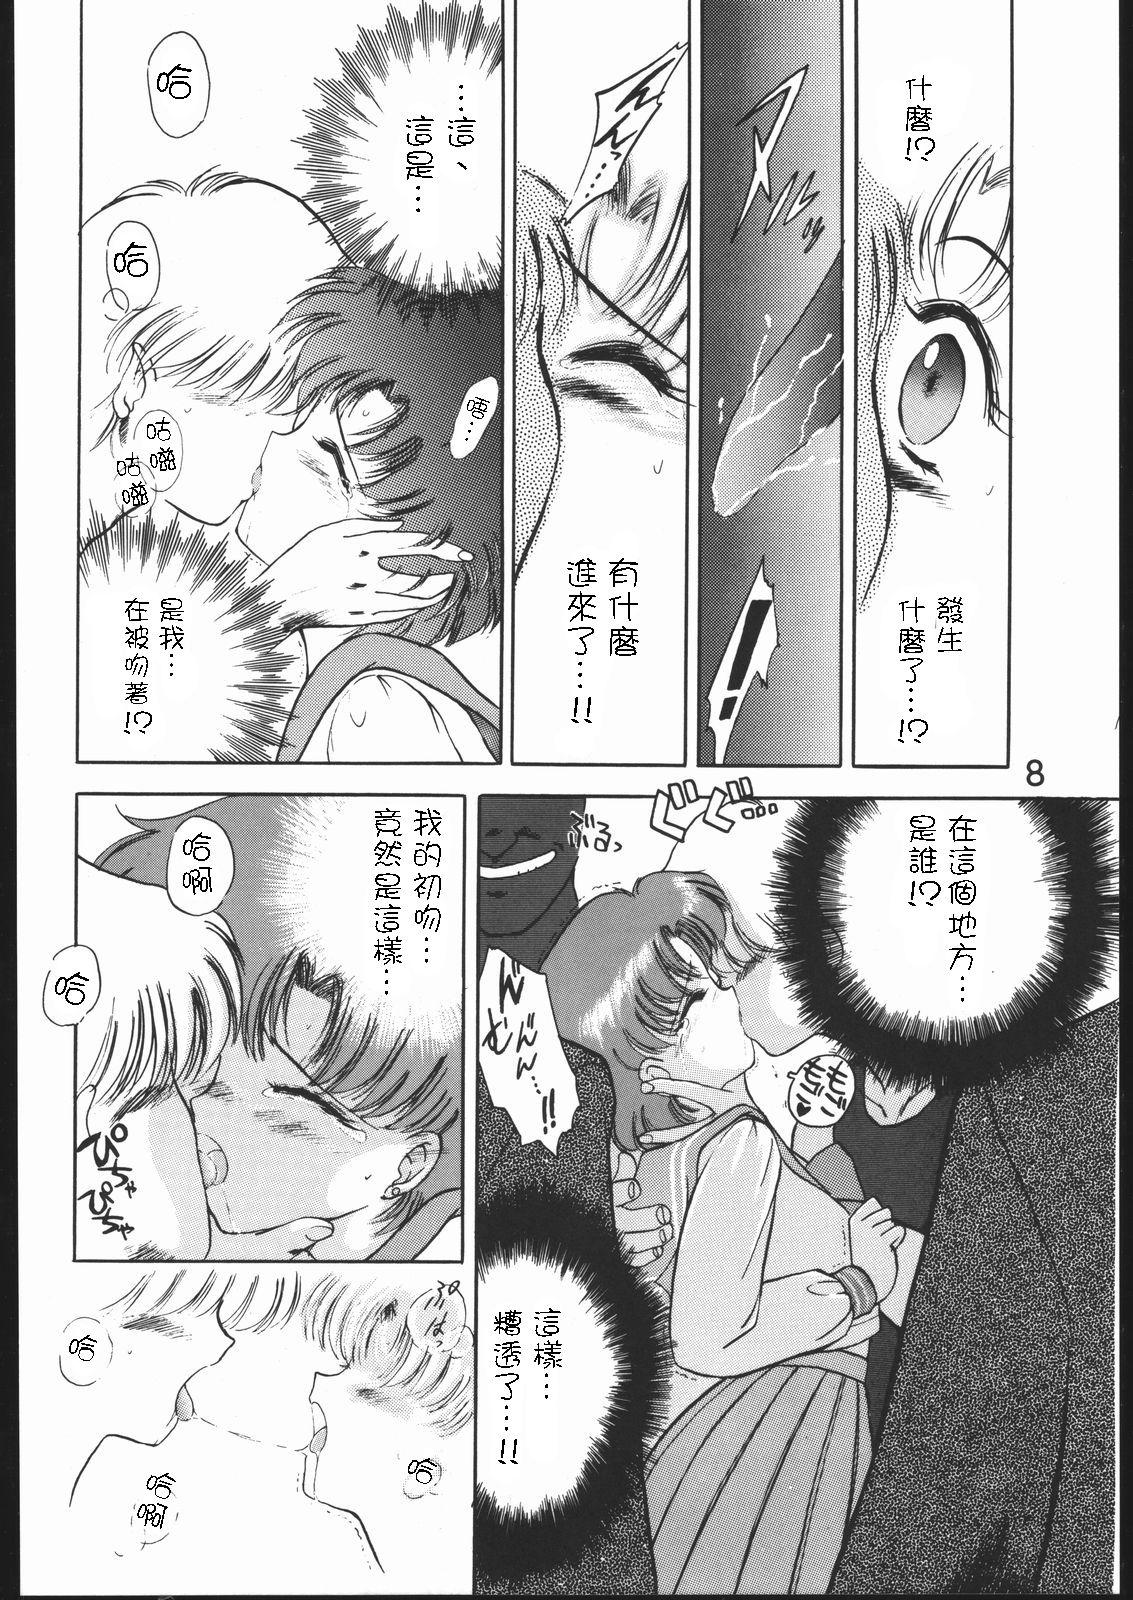 Messy SUBMISSION MERCURY PLUS - Sailor moon Behind - Page 8